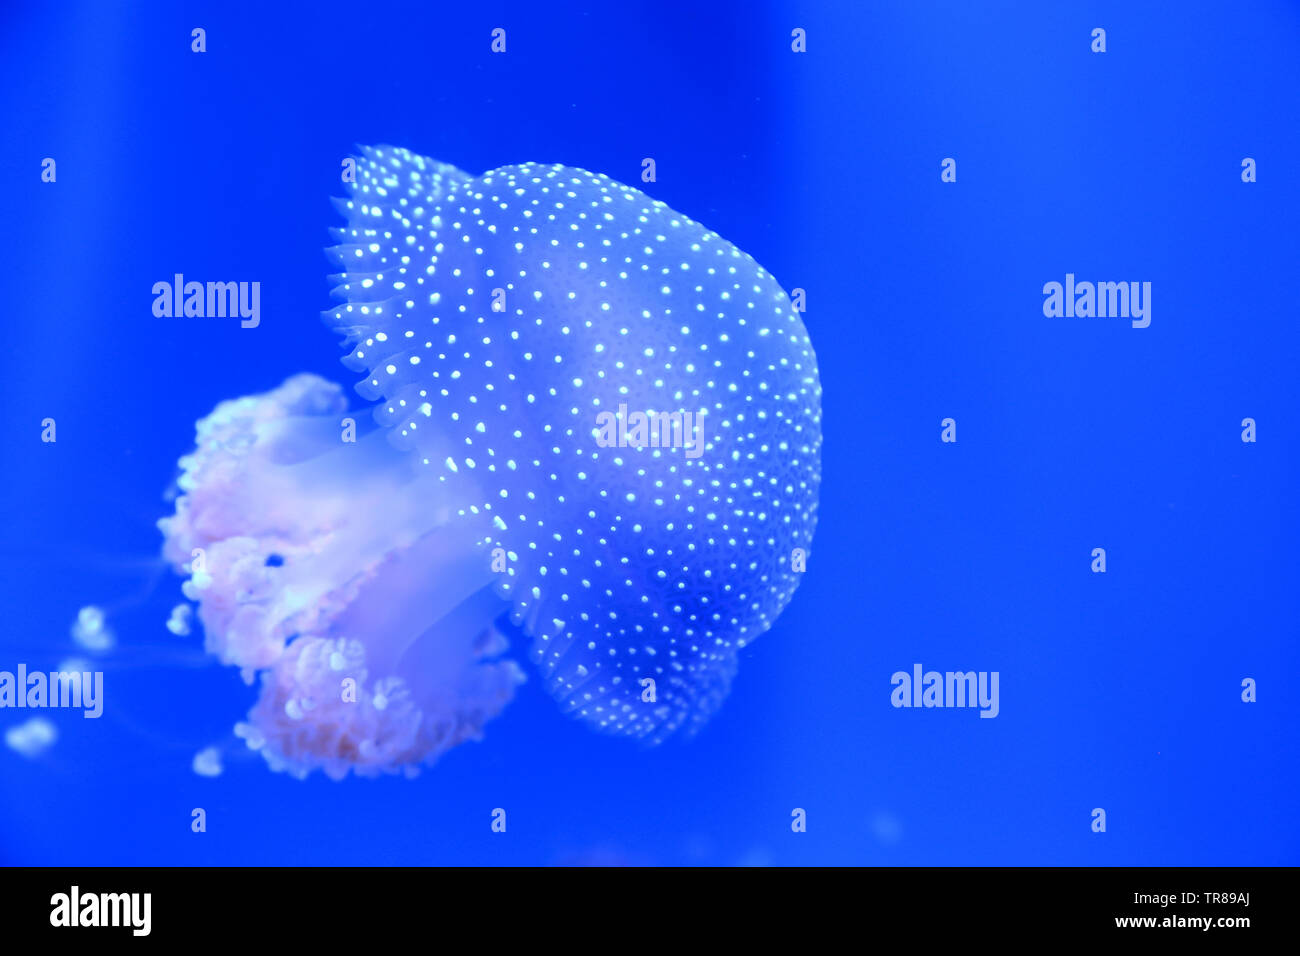 White-spotted jellyfish swimming around like a floating bell as it is also known as. Stock Photo